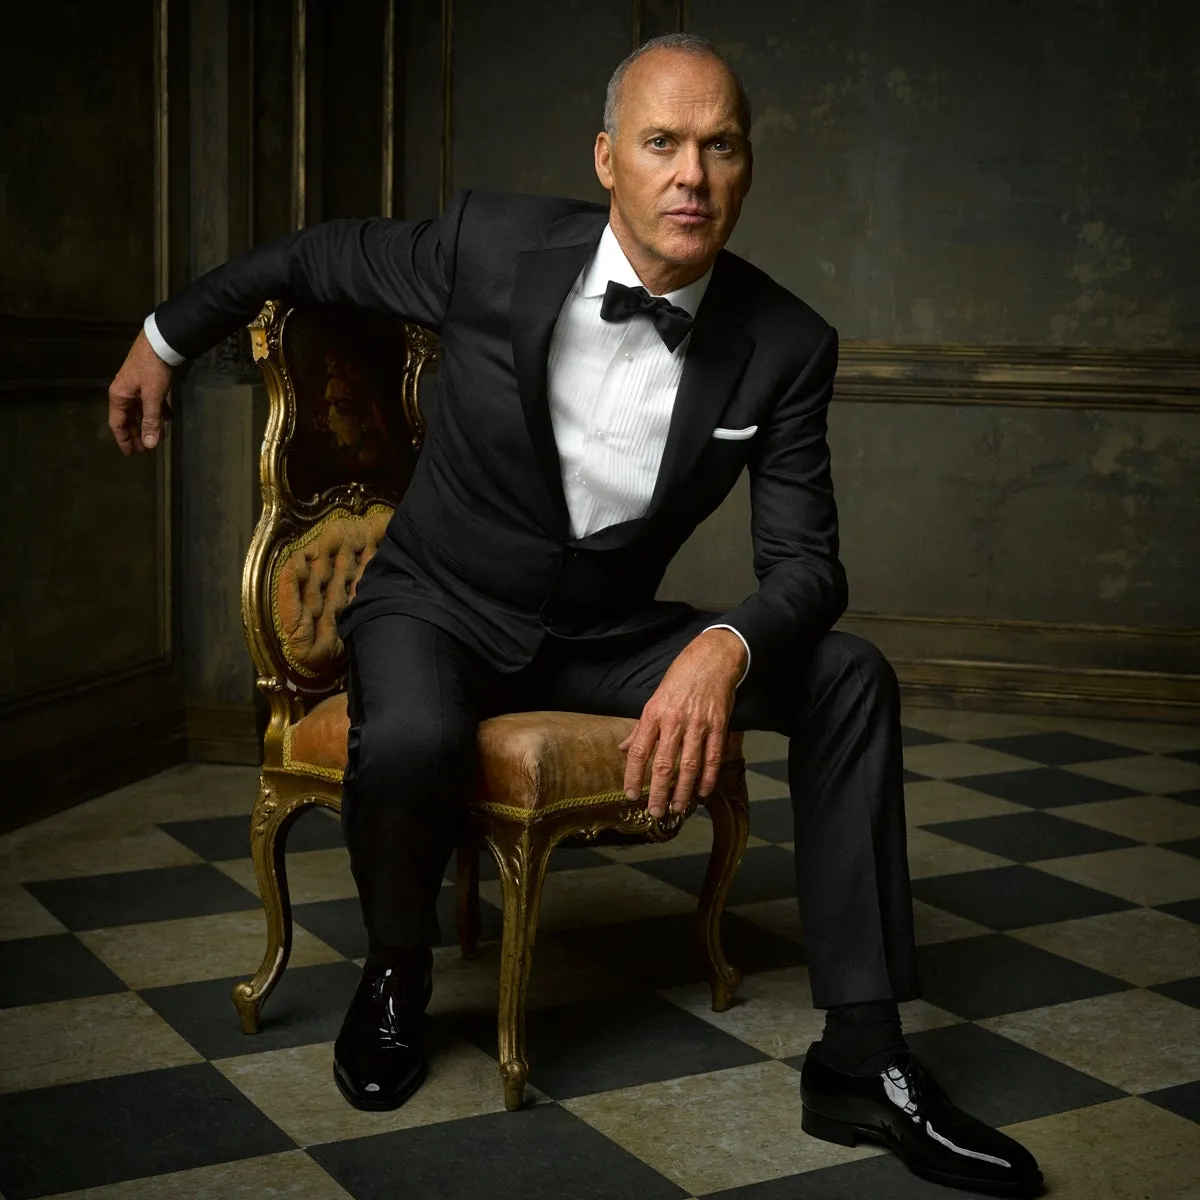 Michael Keaton by Mark Seliger at the 2015